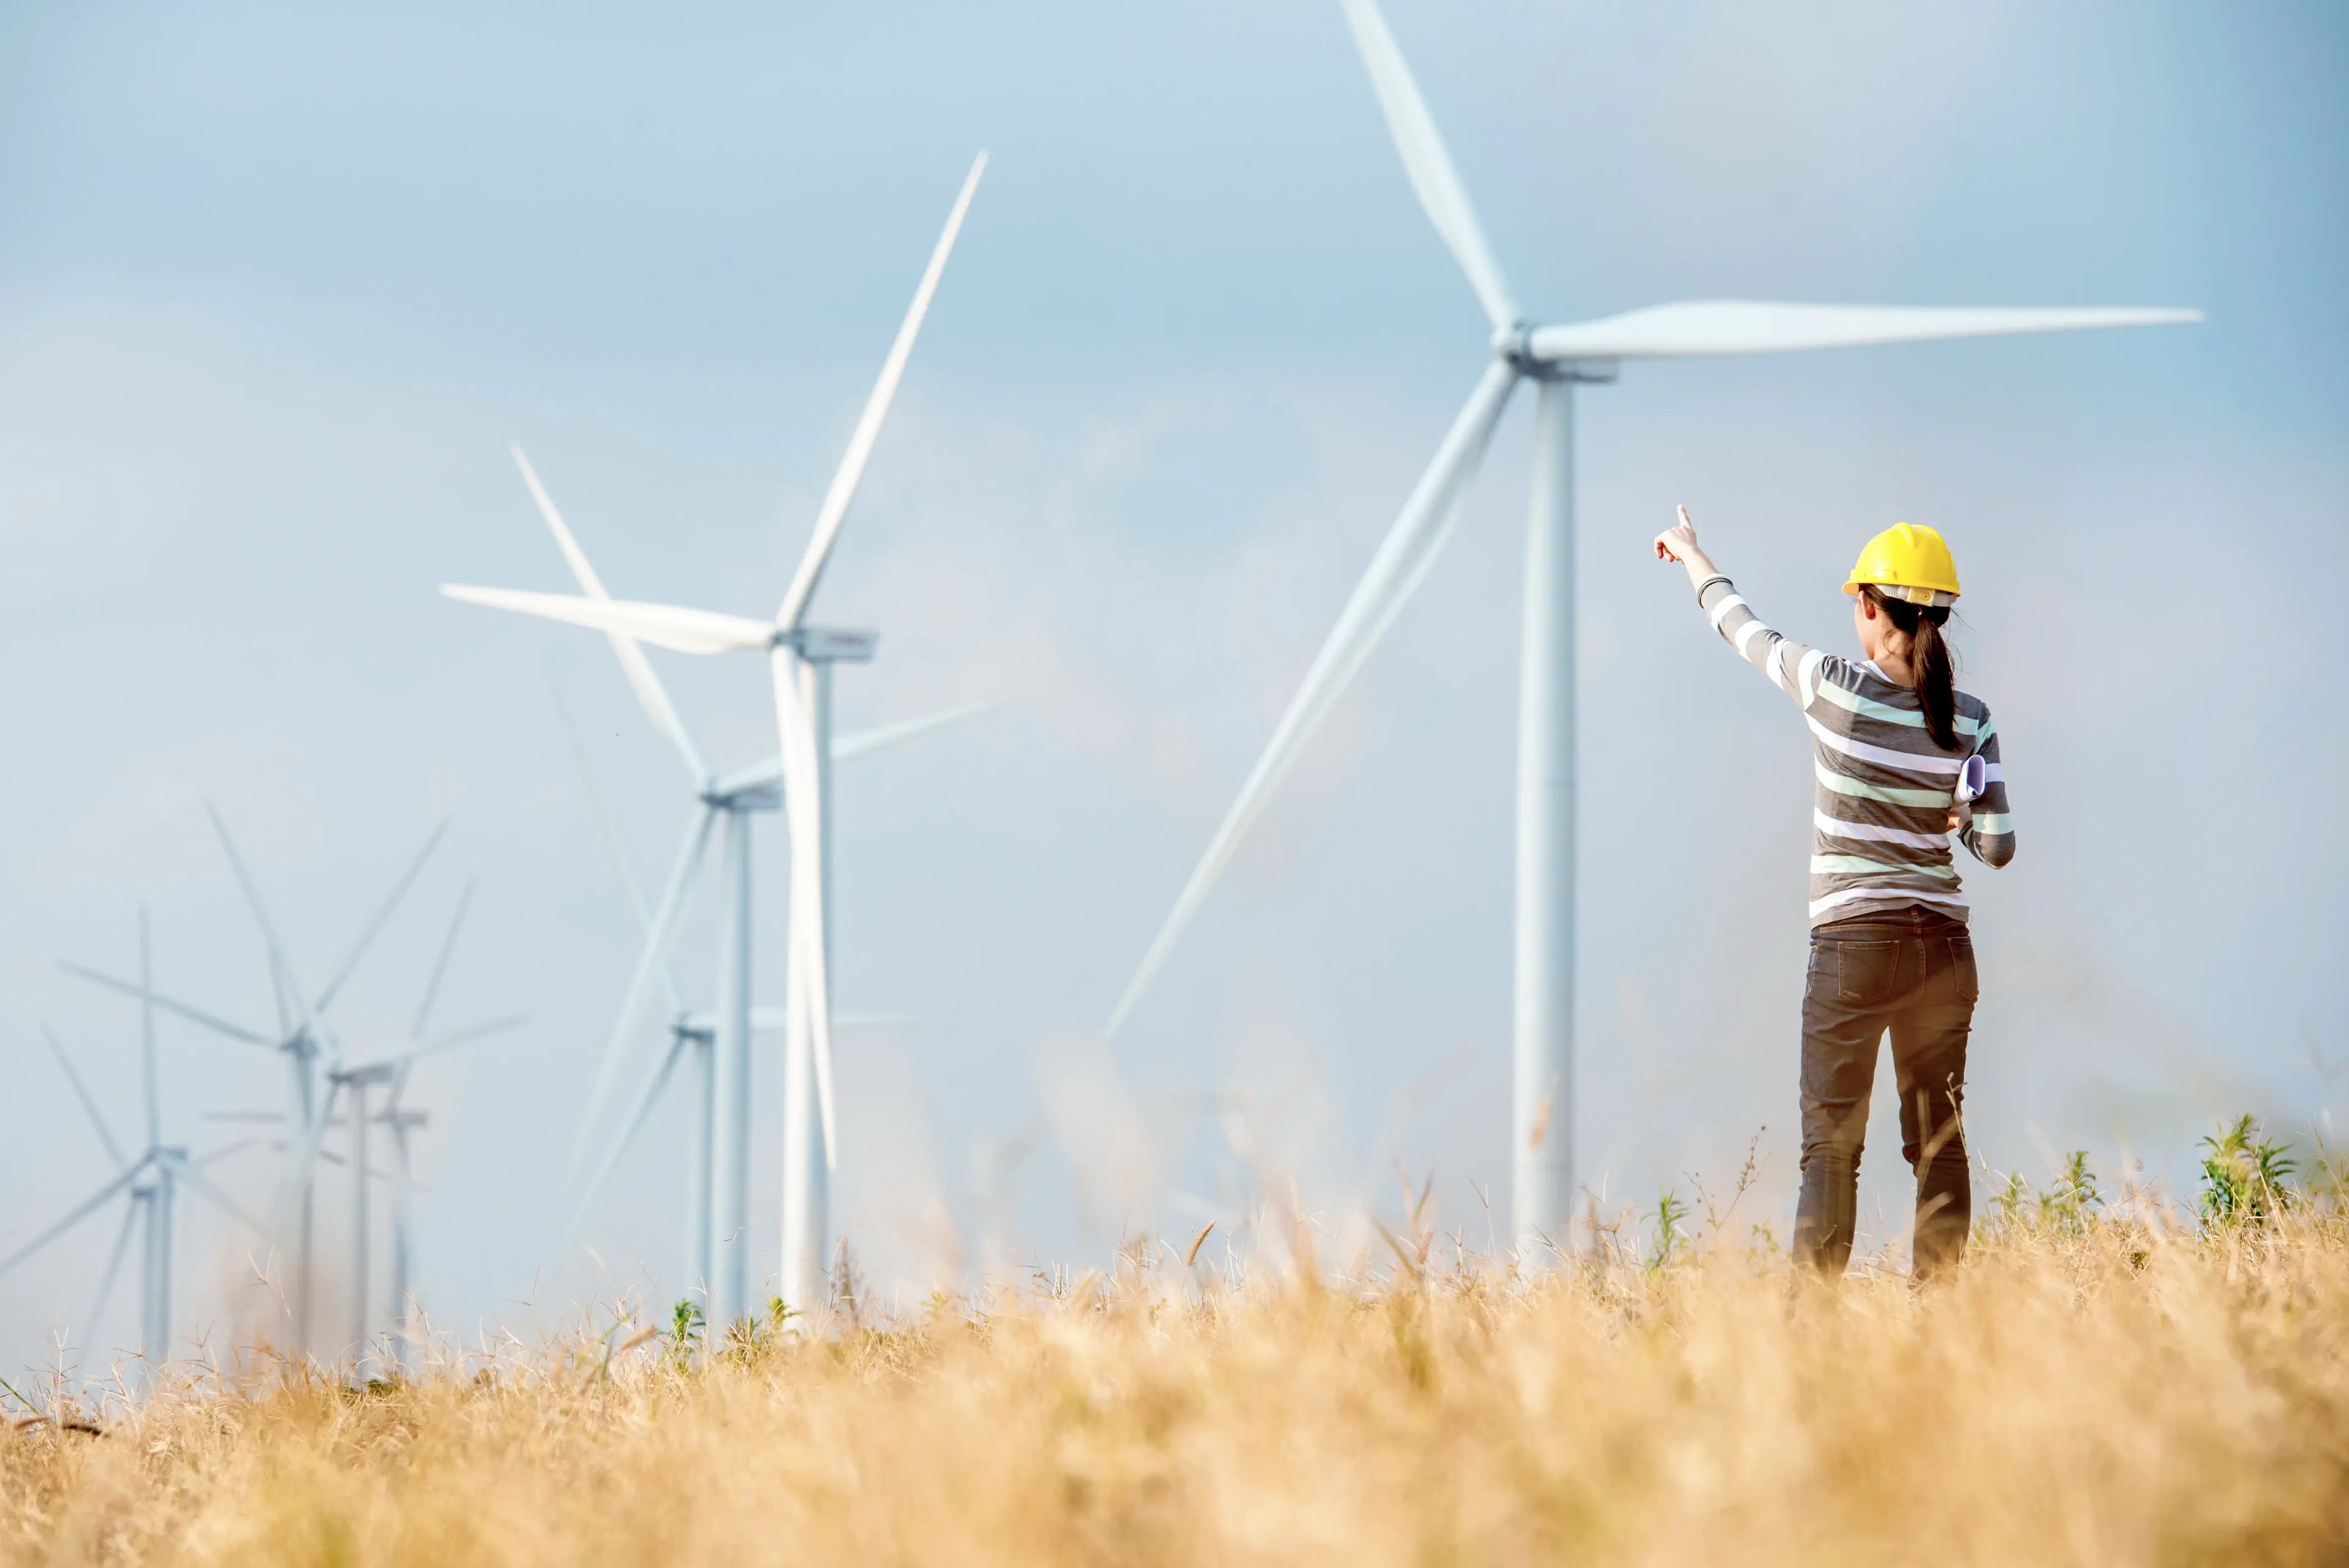 Vattenfall Benefits From Volue Software-As-A-Service